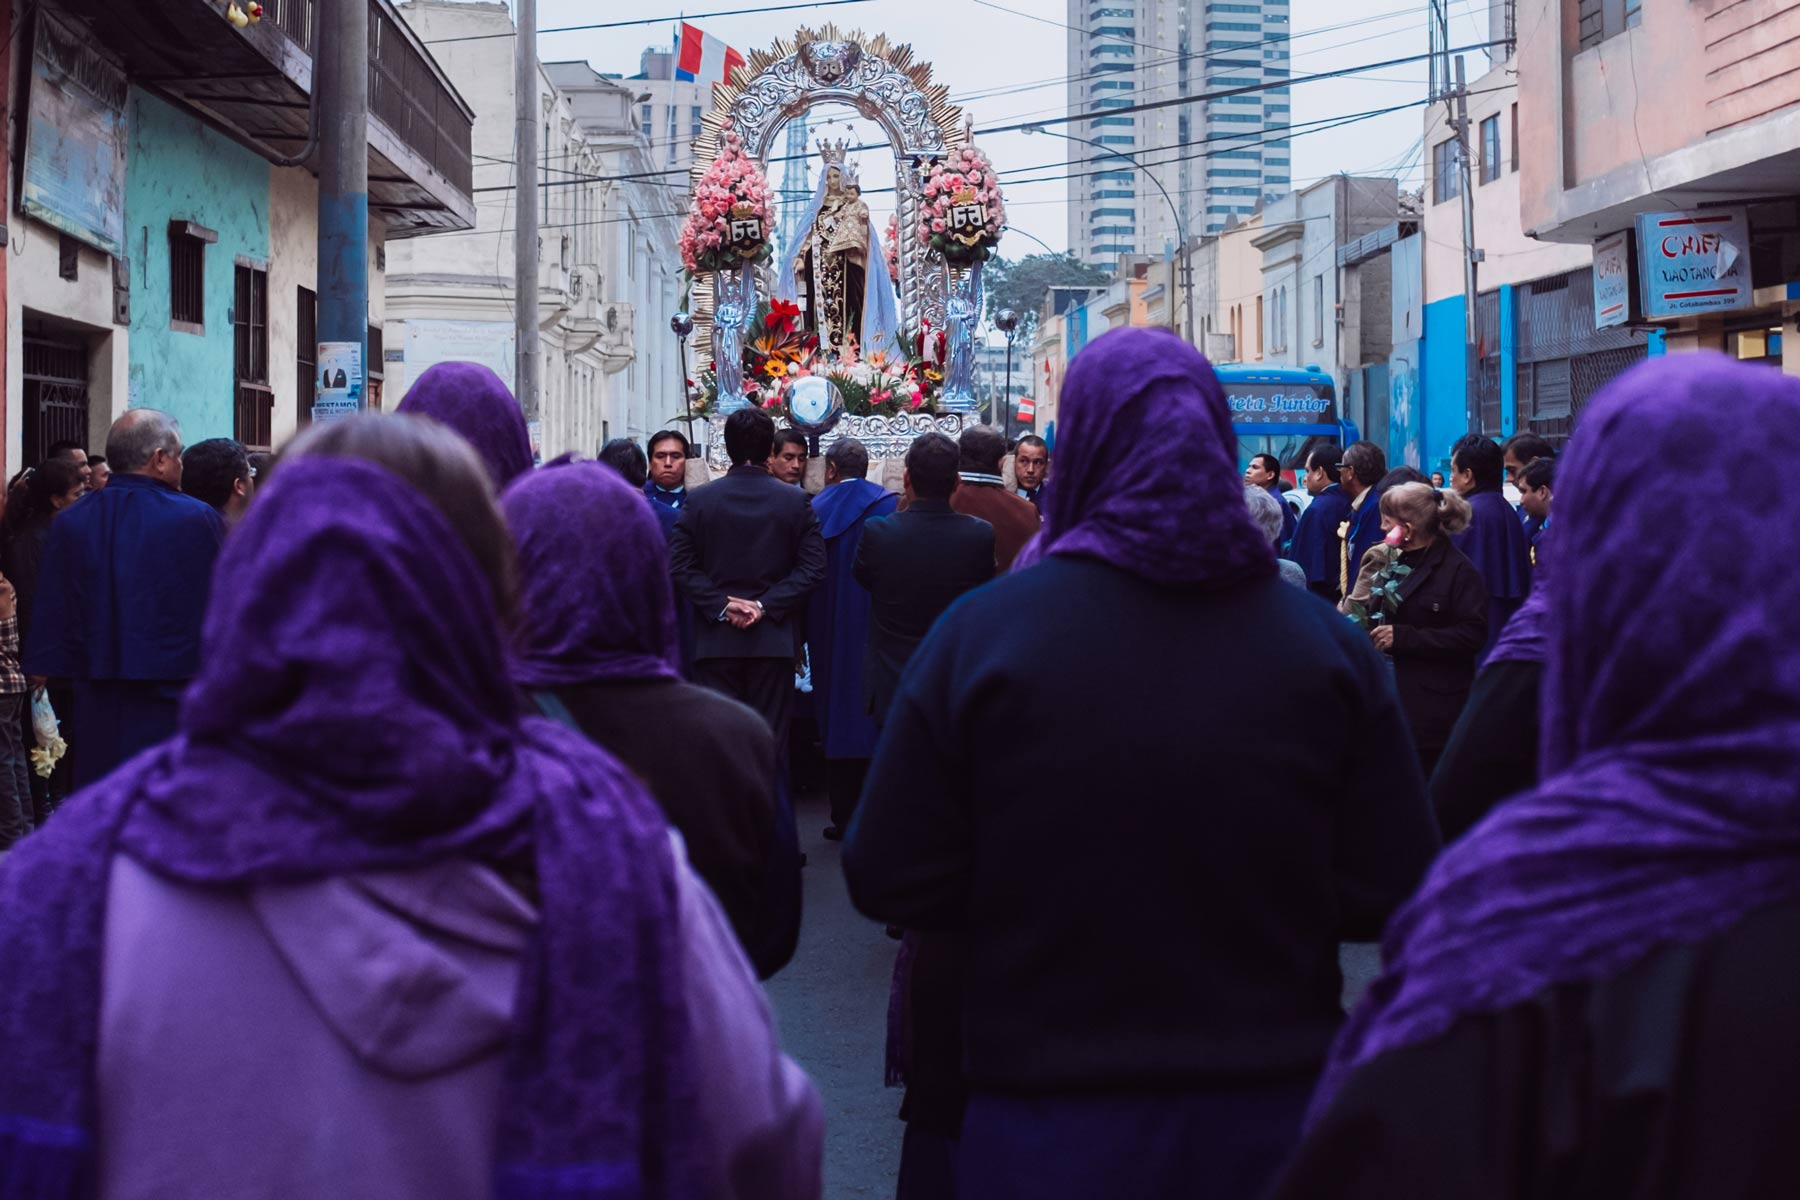 The procession of the Virgin Mary takes place in a small neighborhood in Lima.